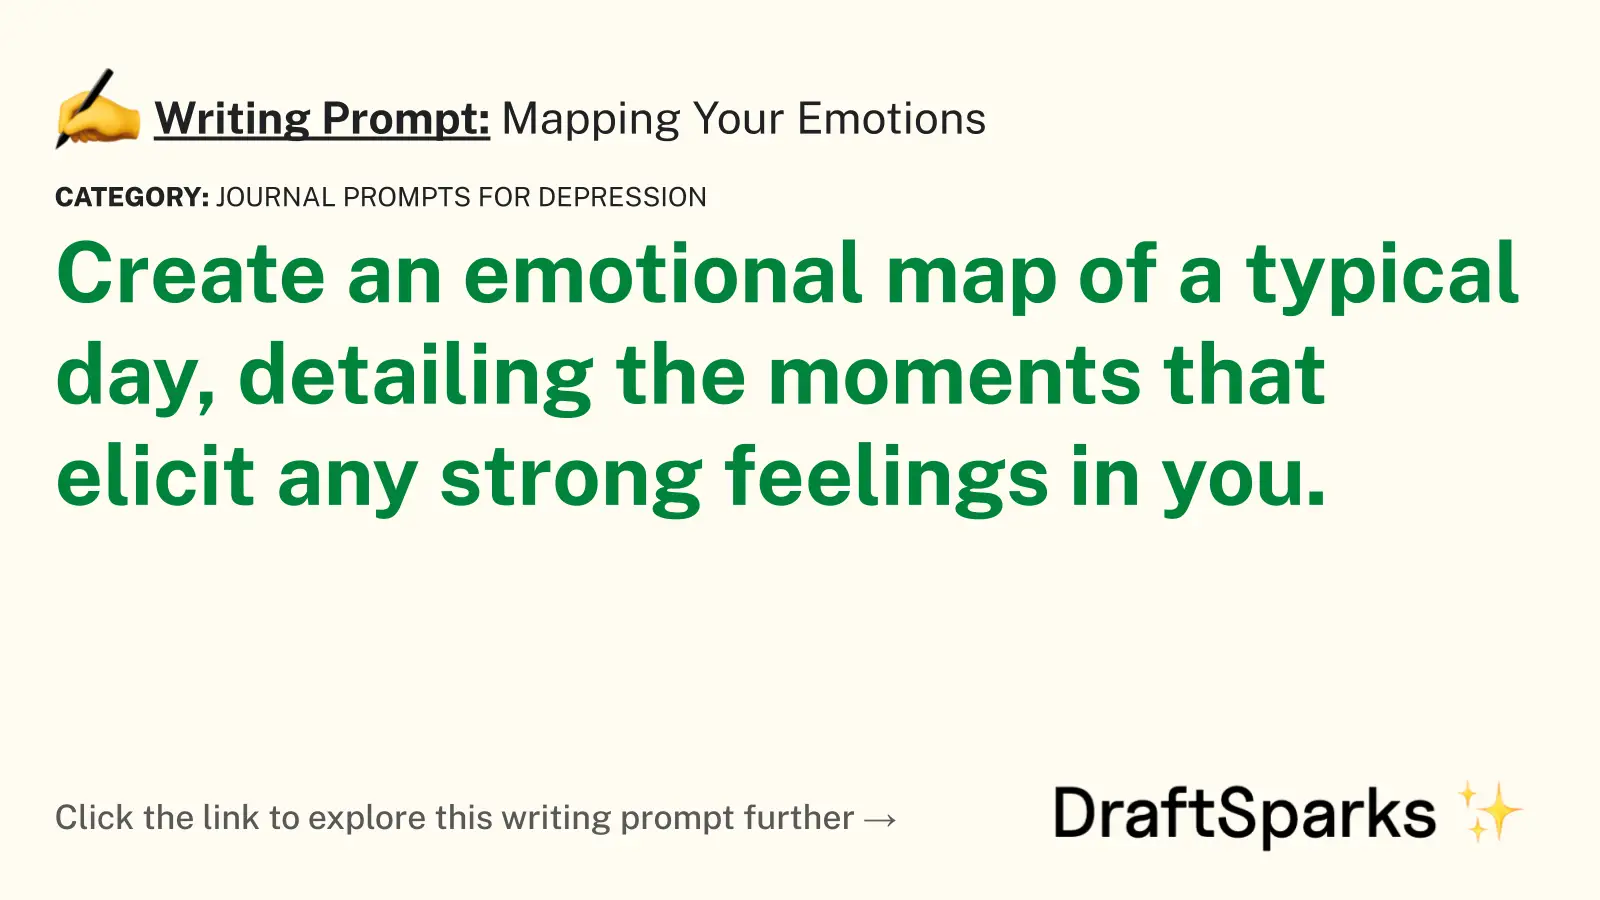 Mapping Your Emotions